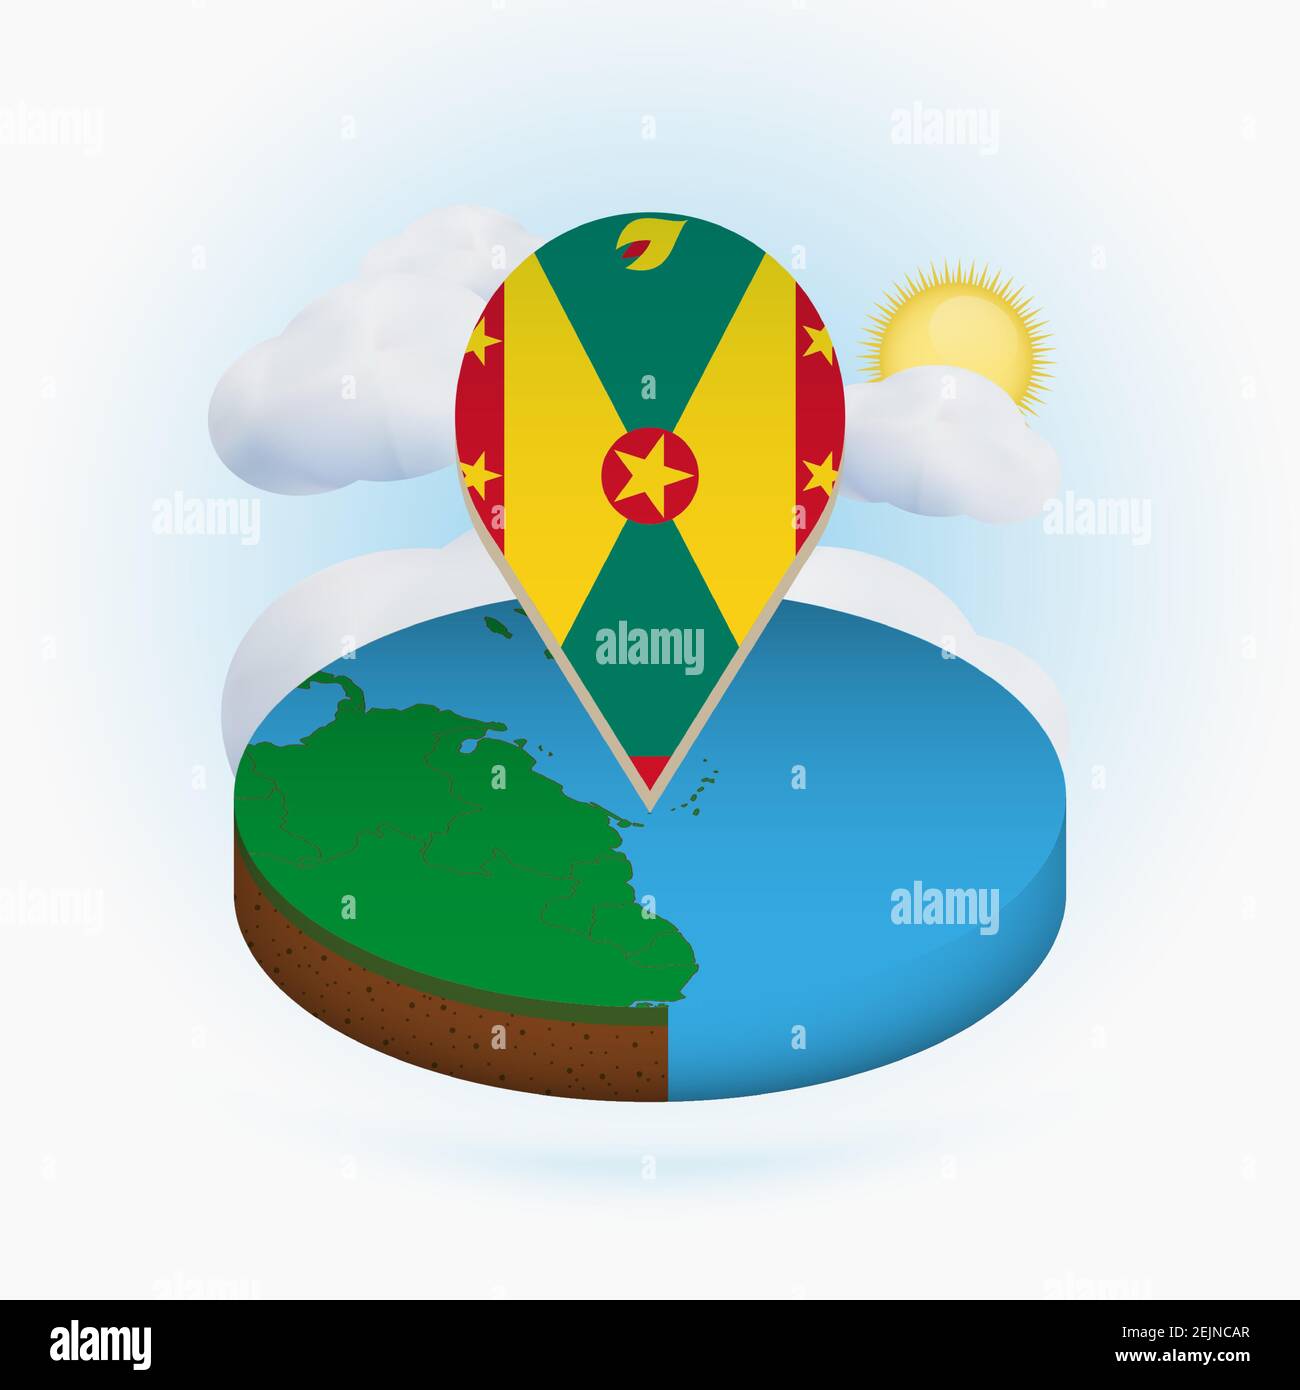 Isometric round map of Grenada and point marker with flag of Grenada. Cloud and sun on background. Isometric vector illustration. Stock Vector